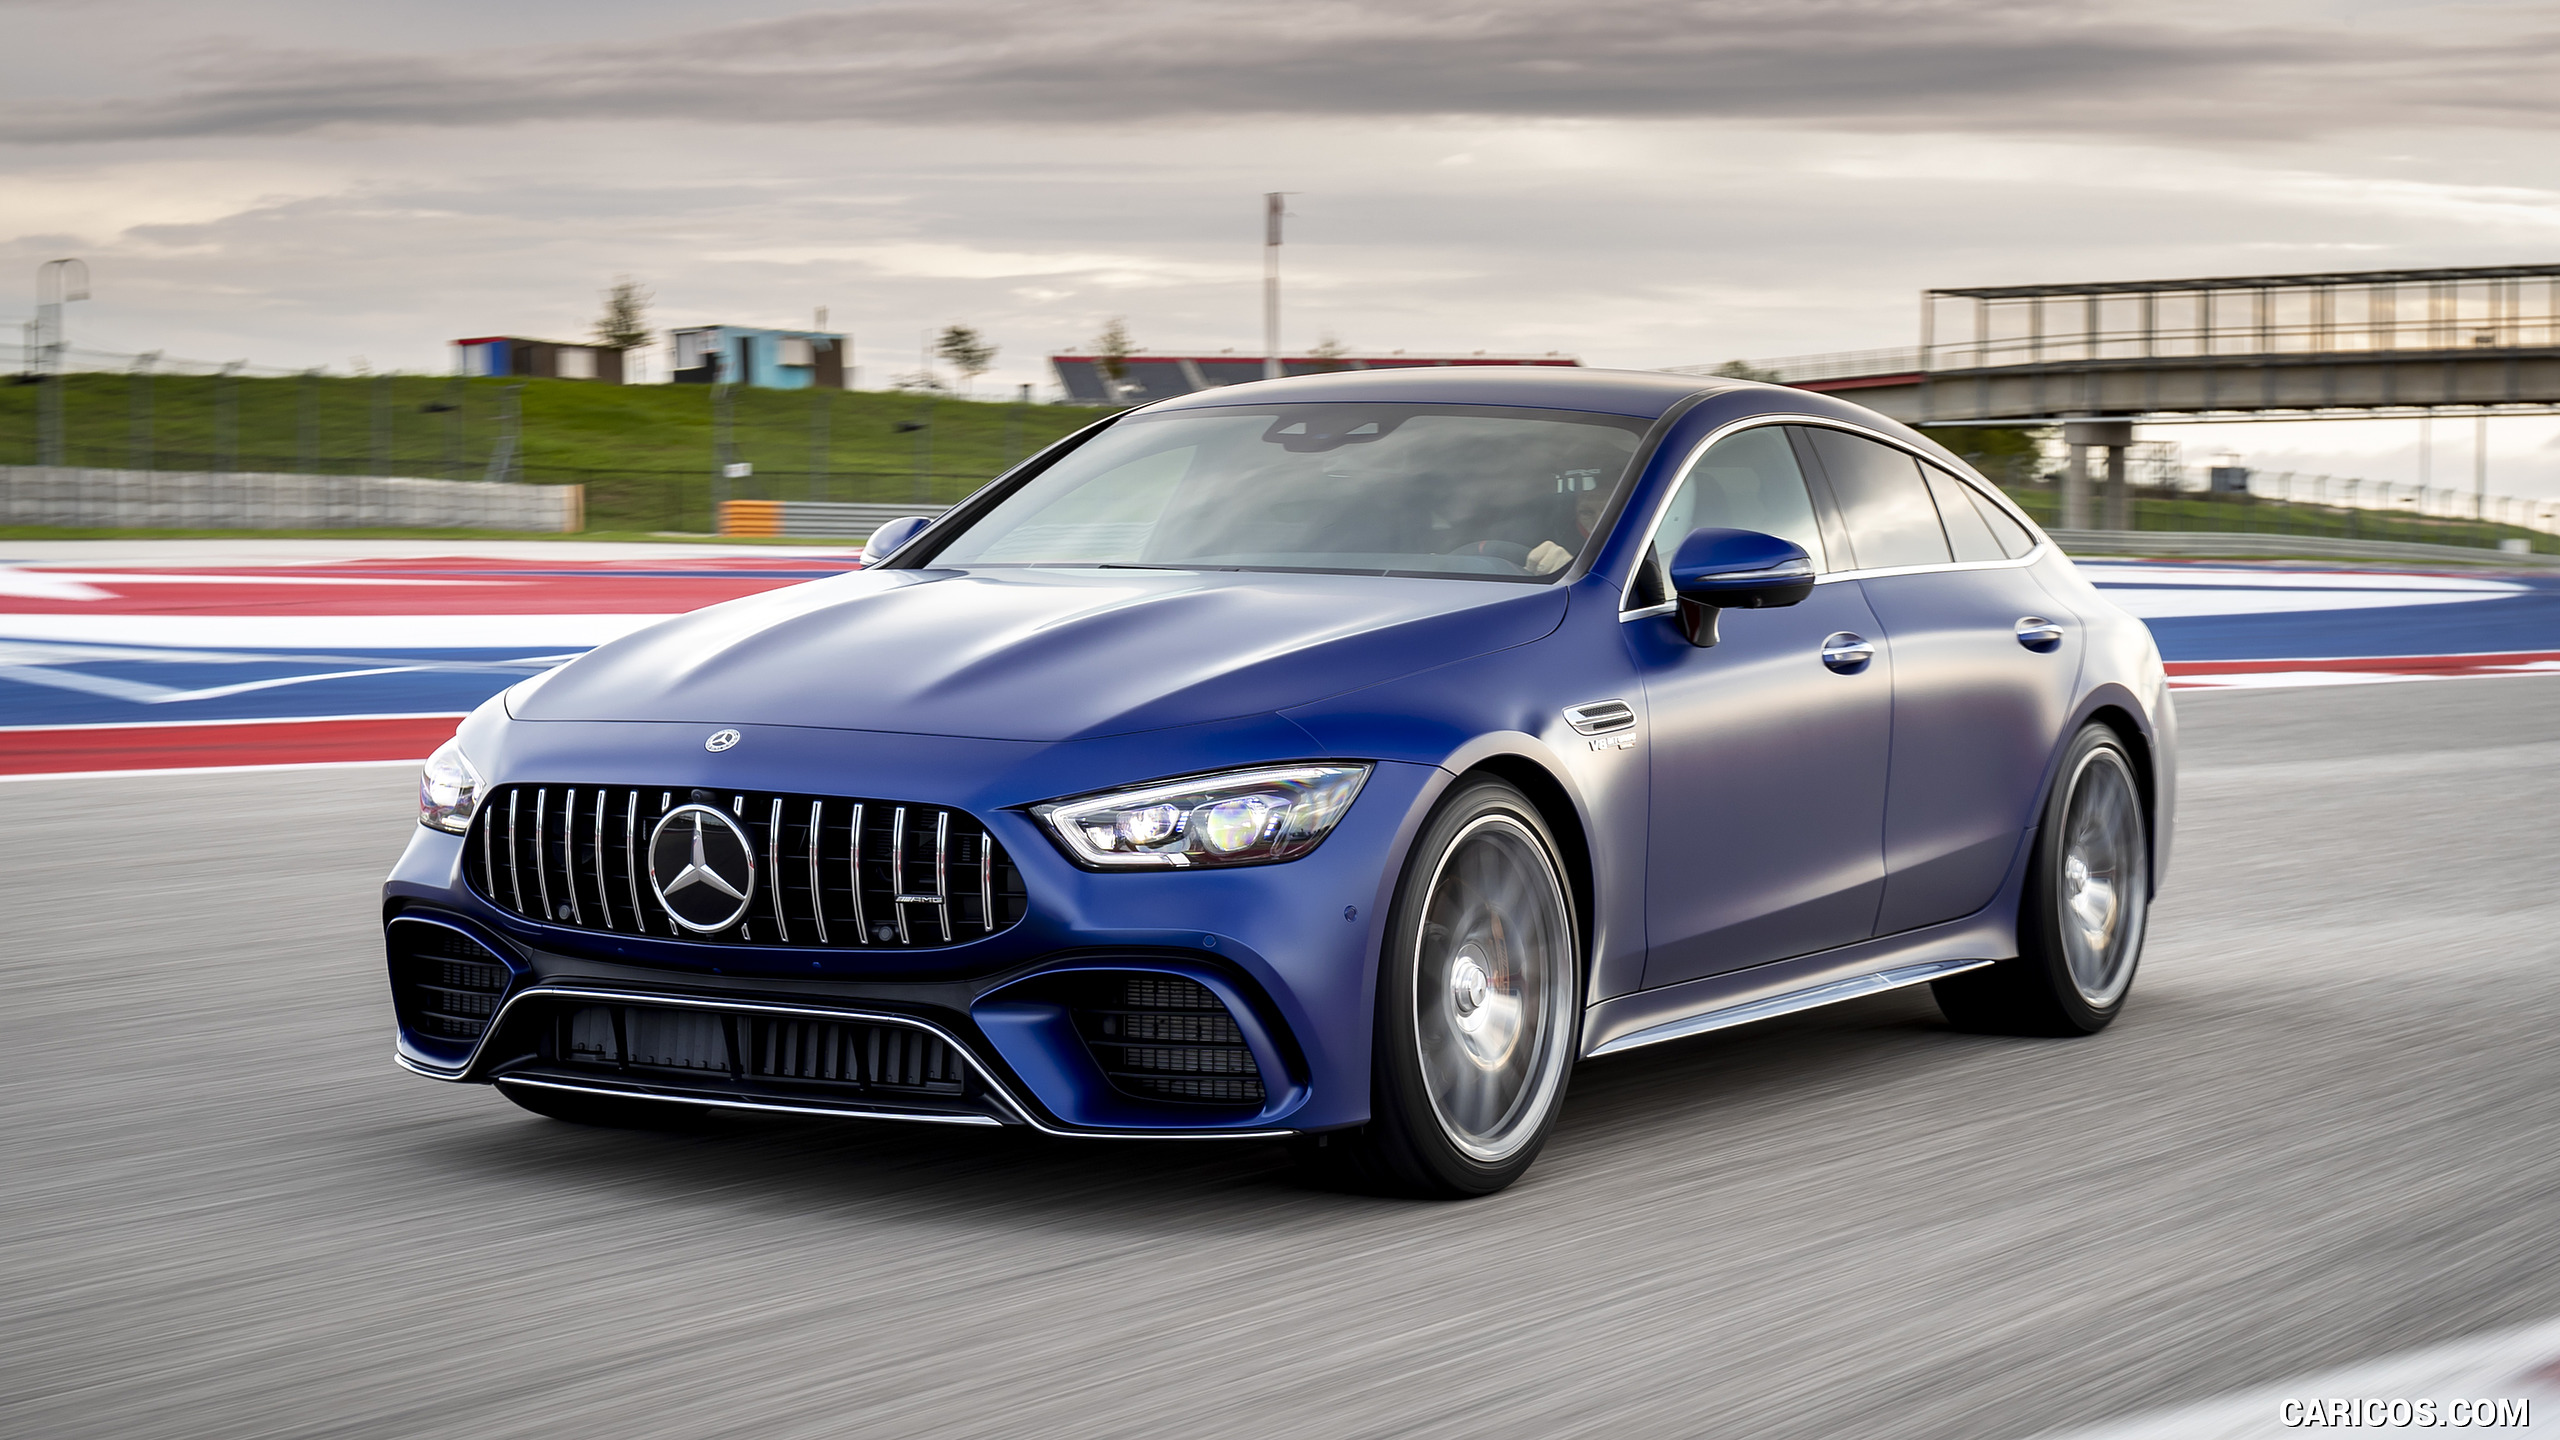 2019 Mercedes-AMG GT 63 S 4MATIC+ 4-Door Coupe - Front Three-Quarter, #96 of 427